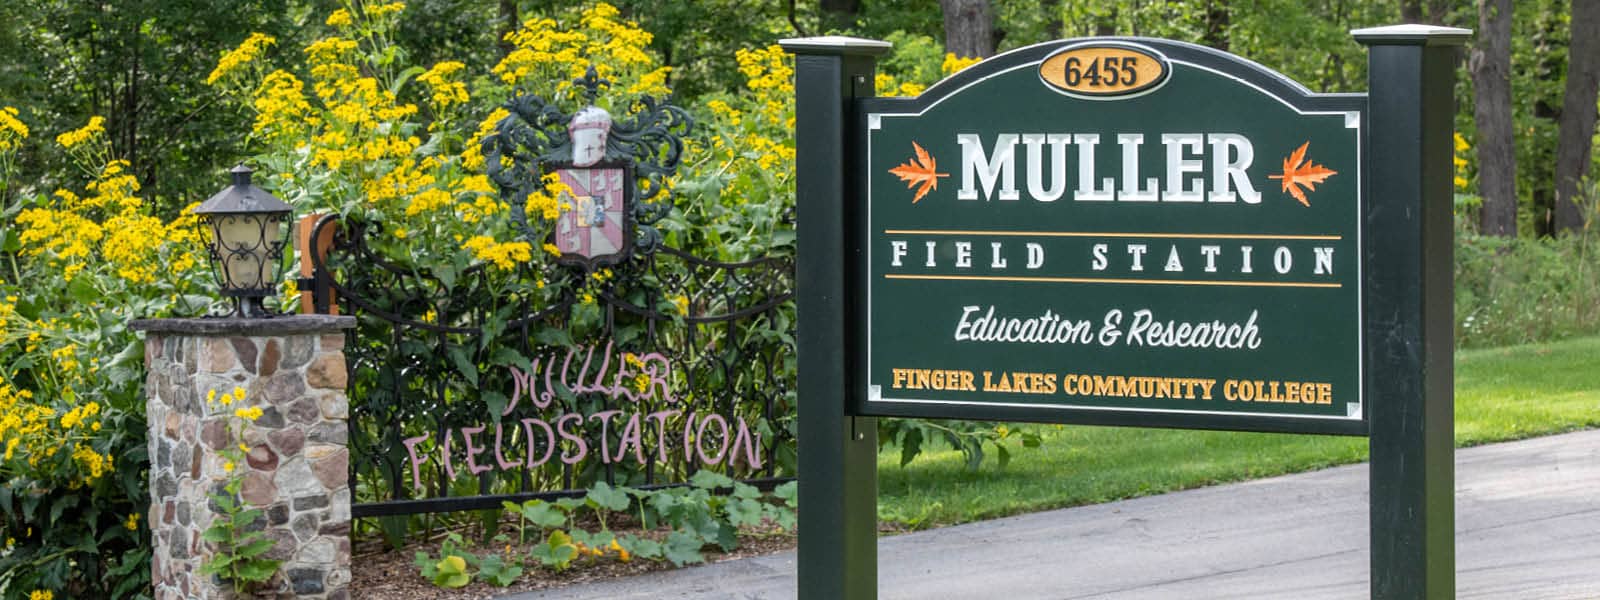 Muller Field Station, front entrance, located at the south end of Honeoye Lake near Naples.